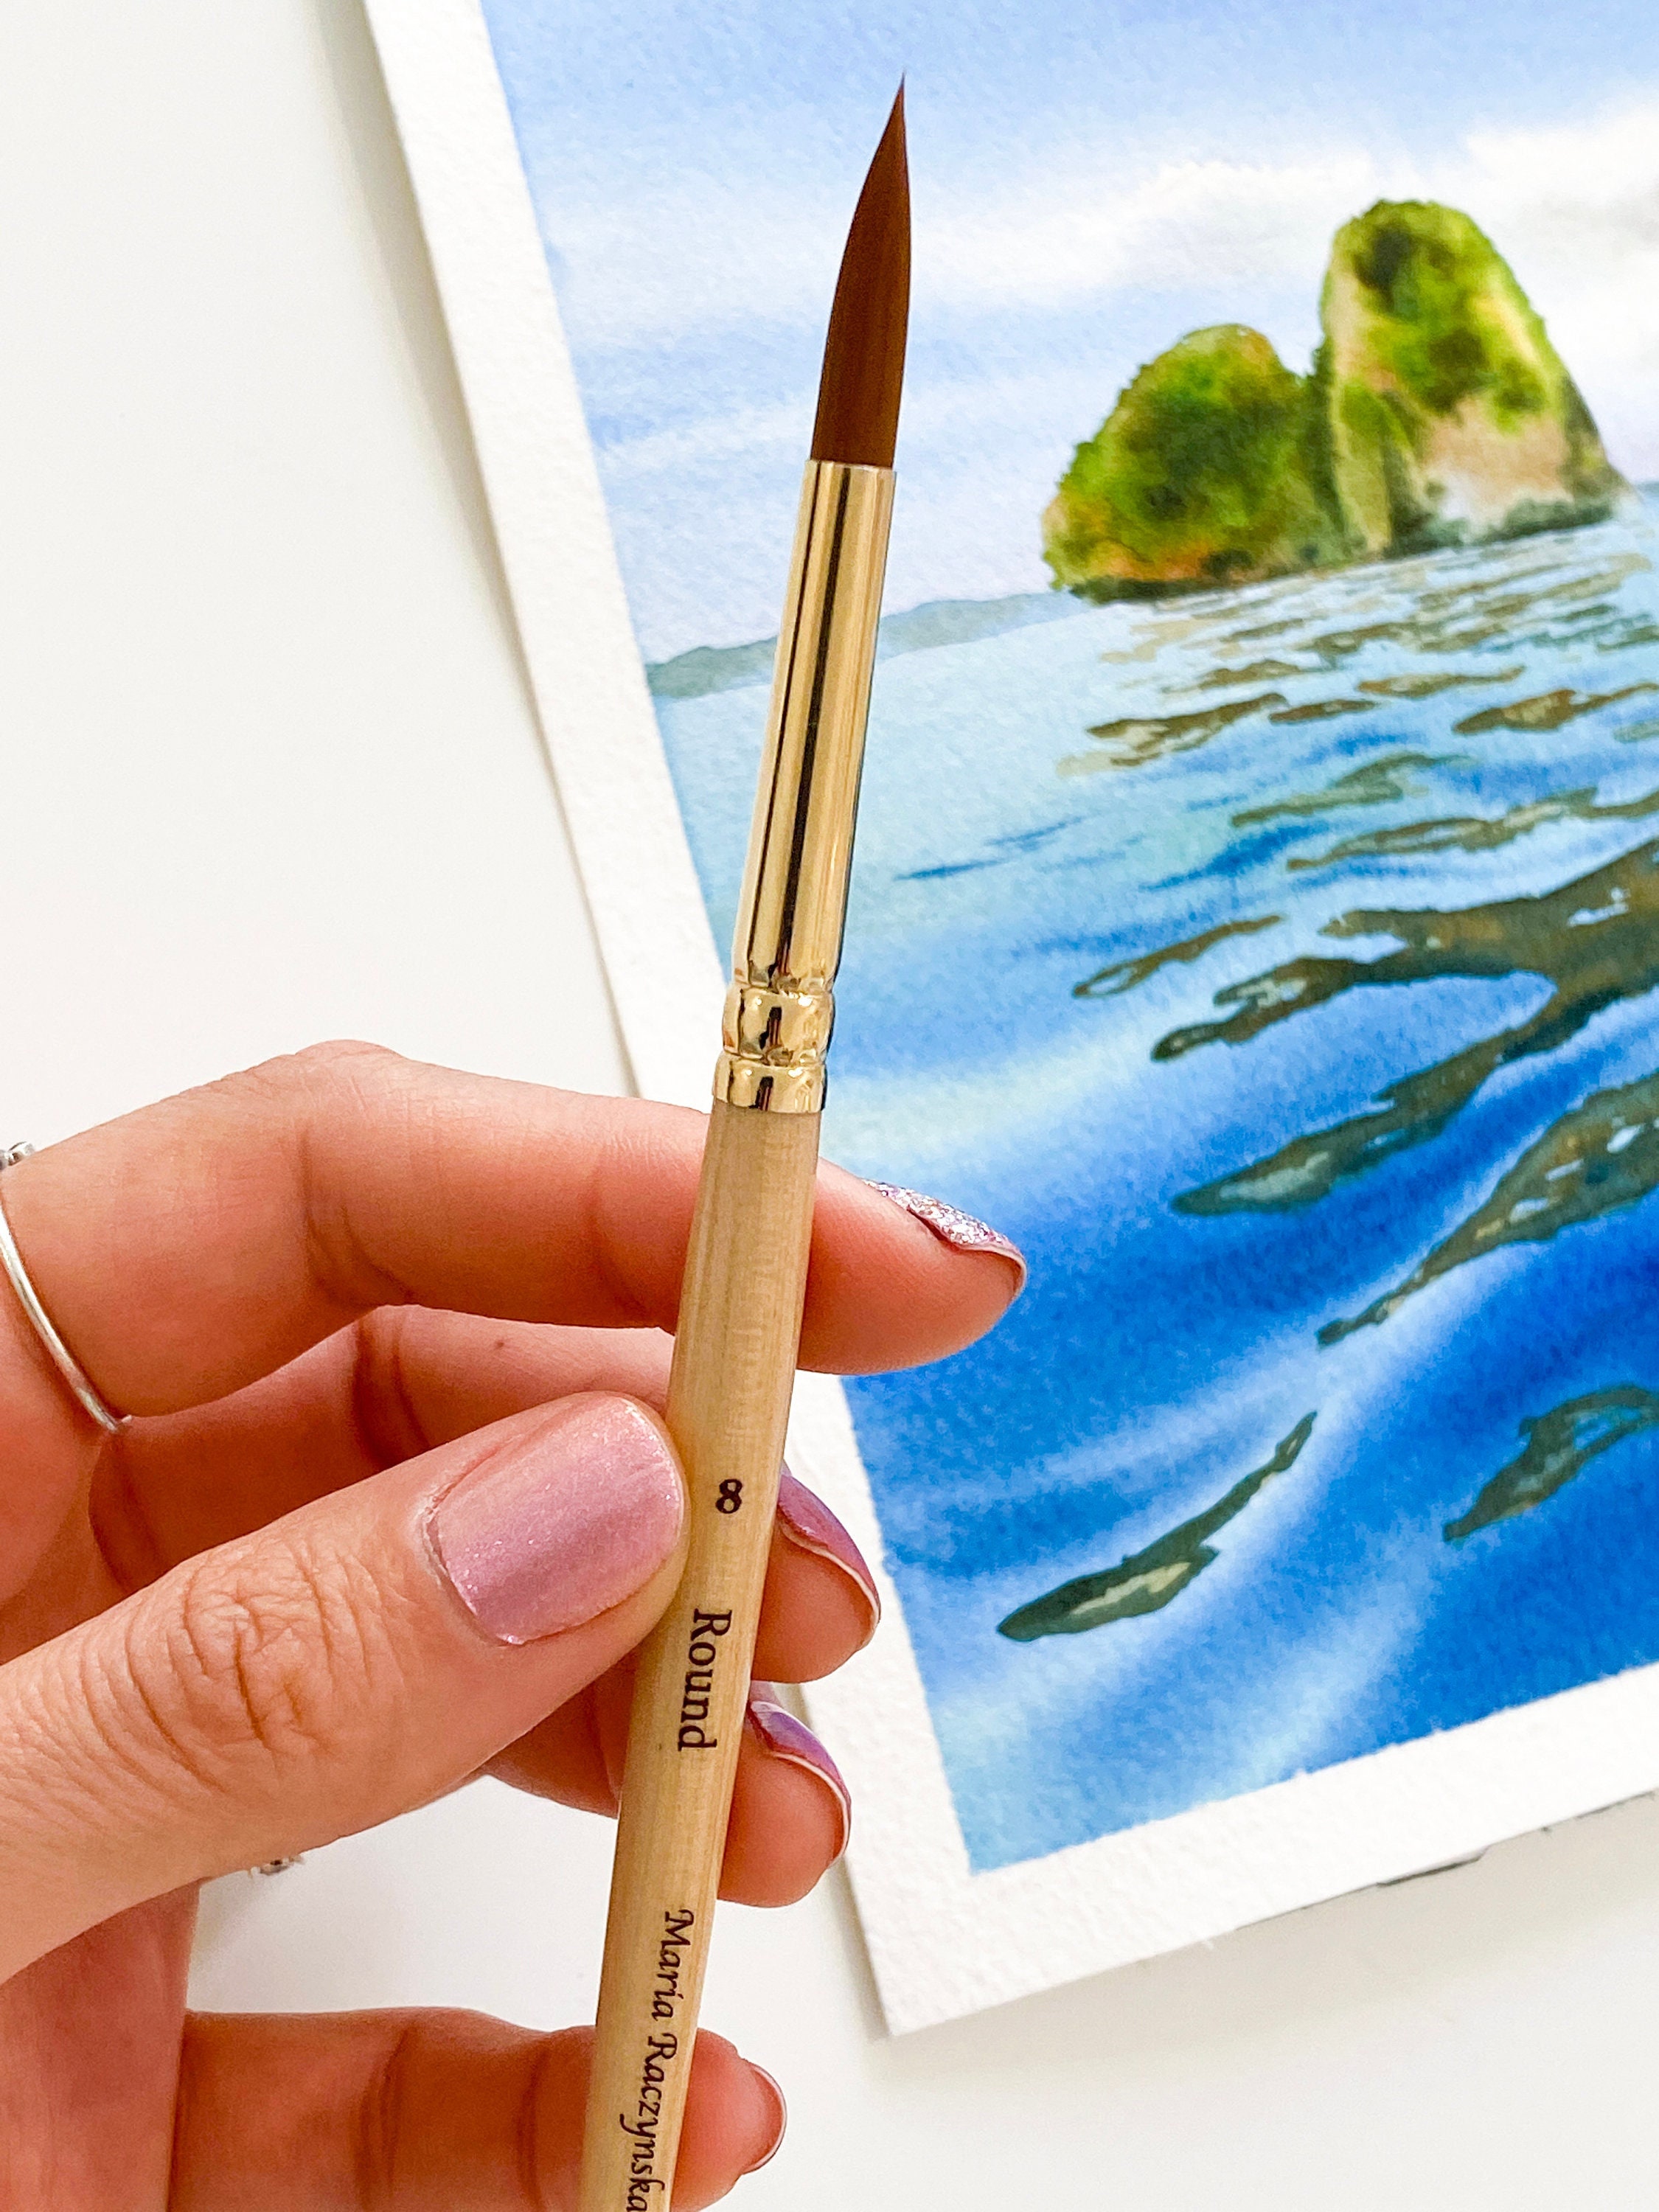 How to Watercolor: Watercolour demonstration with Synthetic Mop brushes 